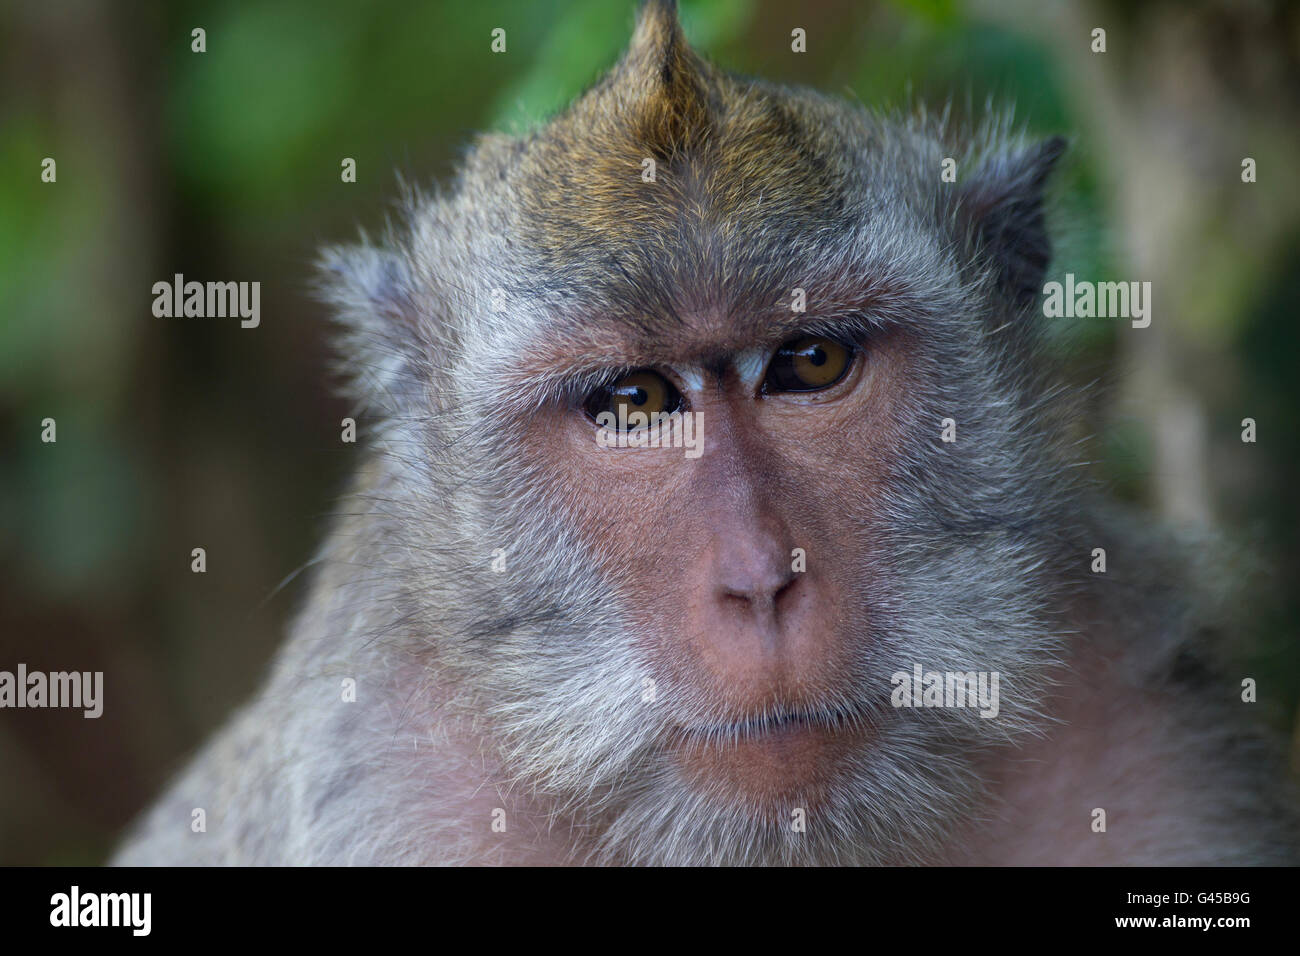 Portrait of a Macaque in Bali, Indonesia Stock Photo